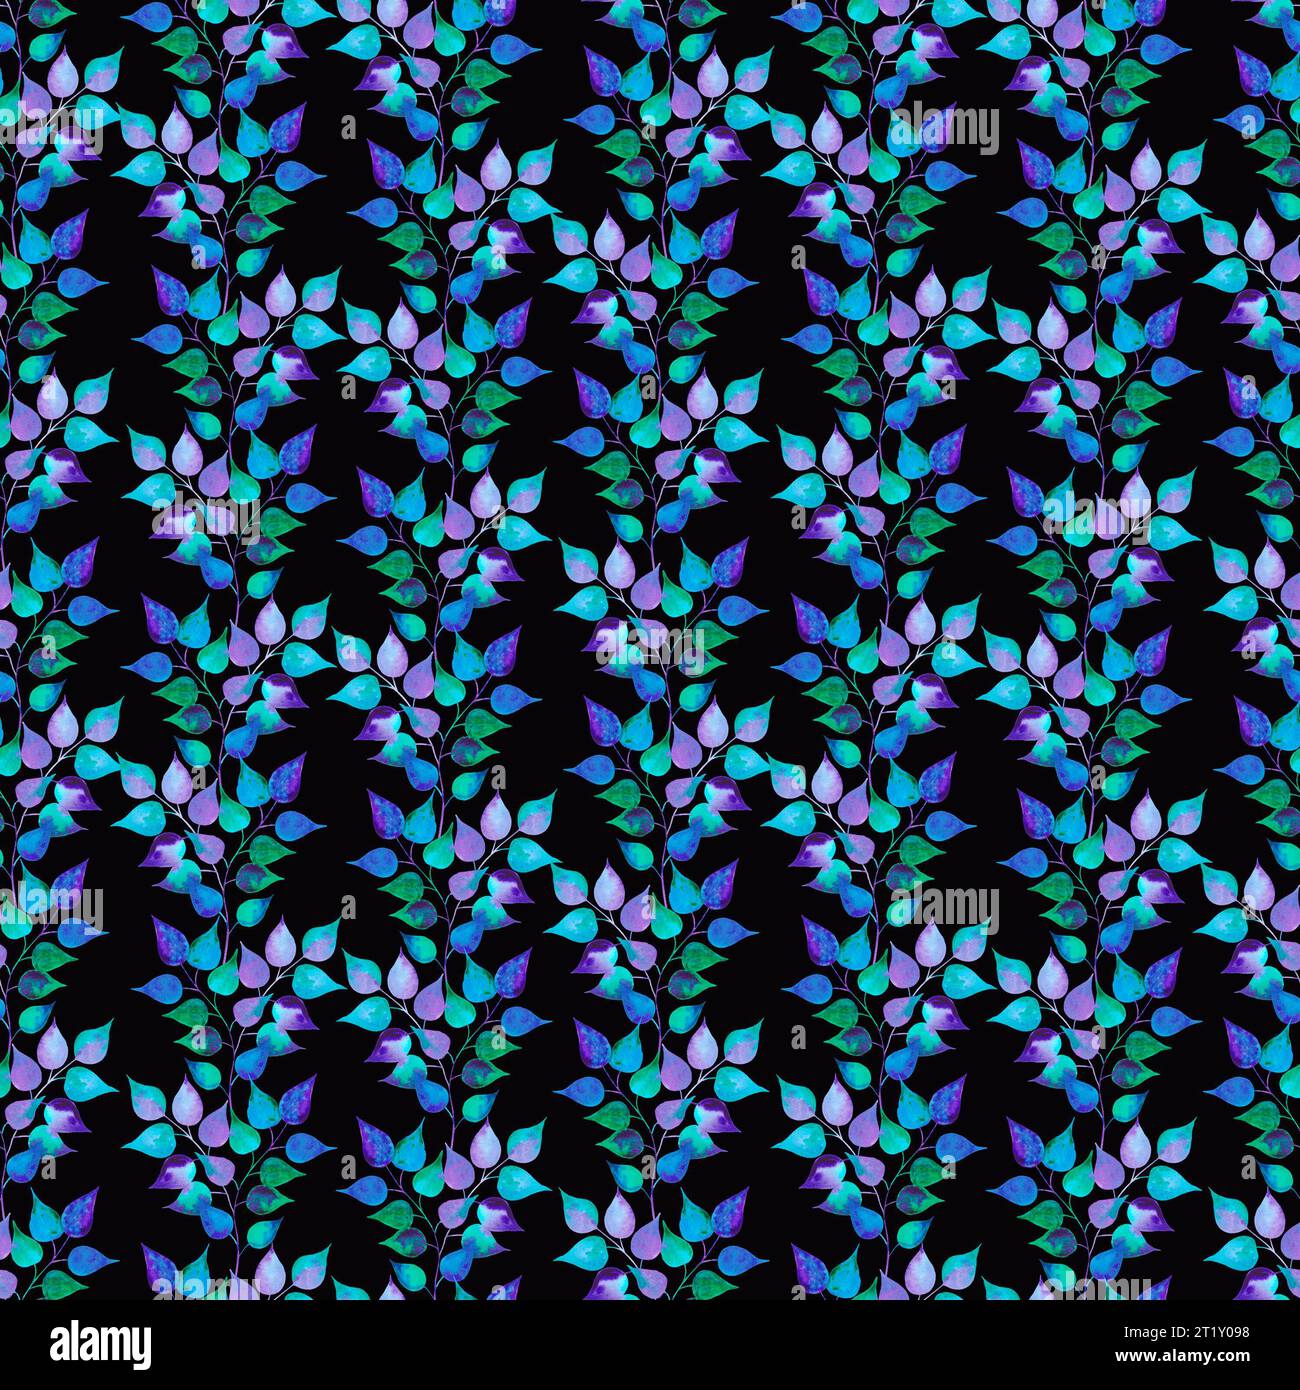 Hand drawn watercolor colorful twig seamless pattern isolated on black background. Can be used for textile, fabric and other printed products Stock Photo